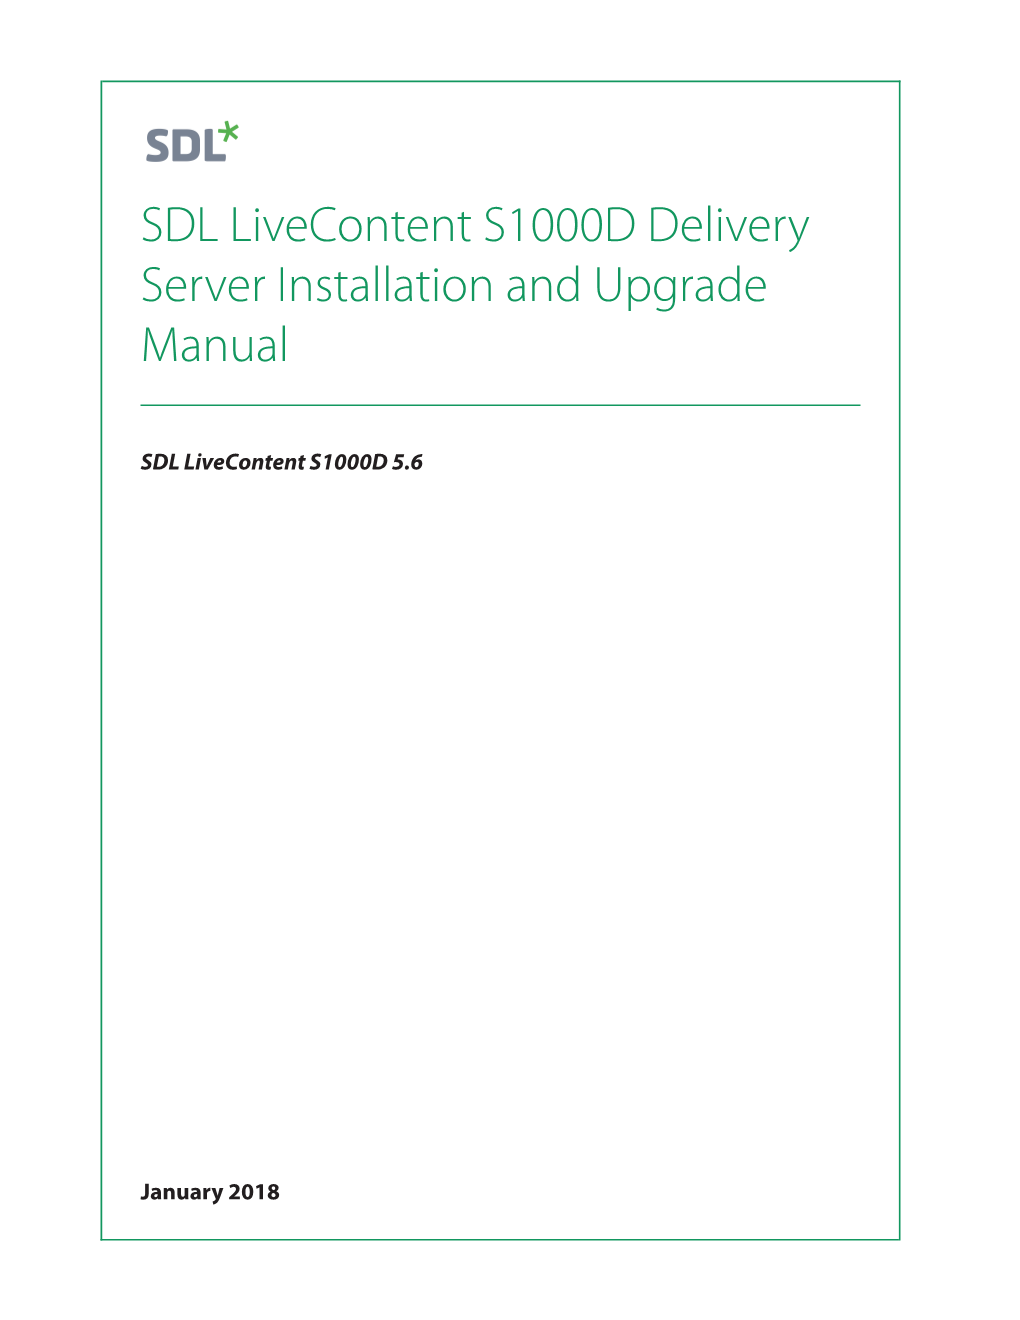 SDL Livecontent S1000D Delivery Server Installation and Upgrade Manual